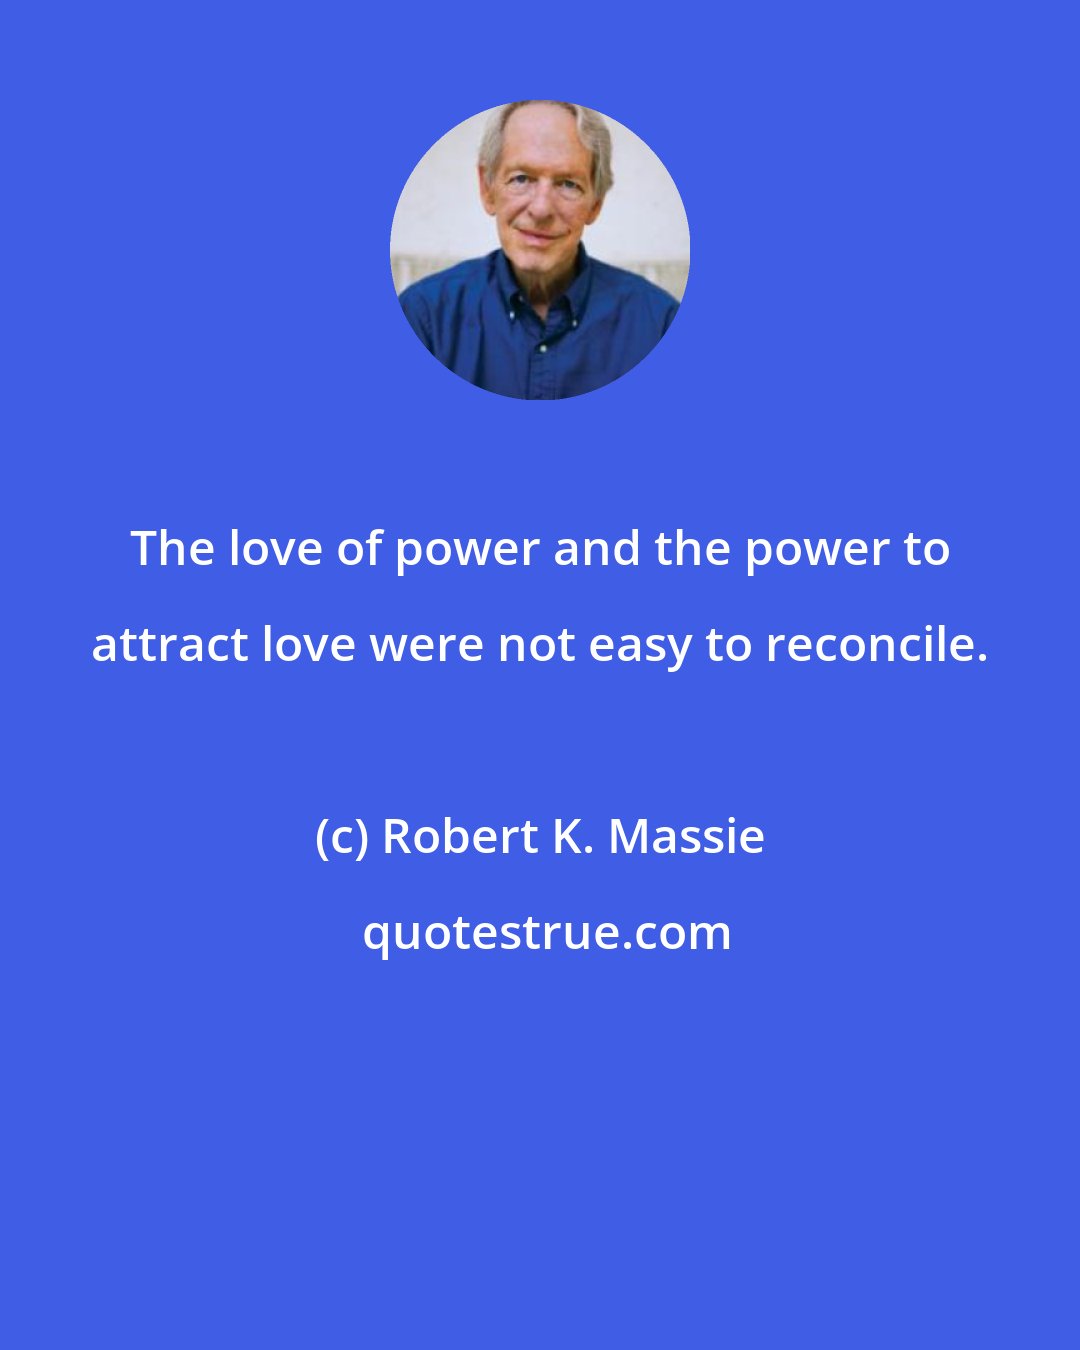 Robert K. Massie: The love of power and the power to attract love were not easy to reconcile.